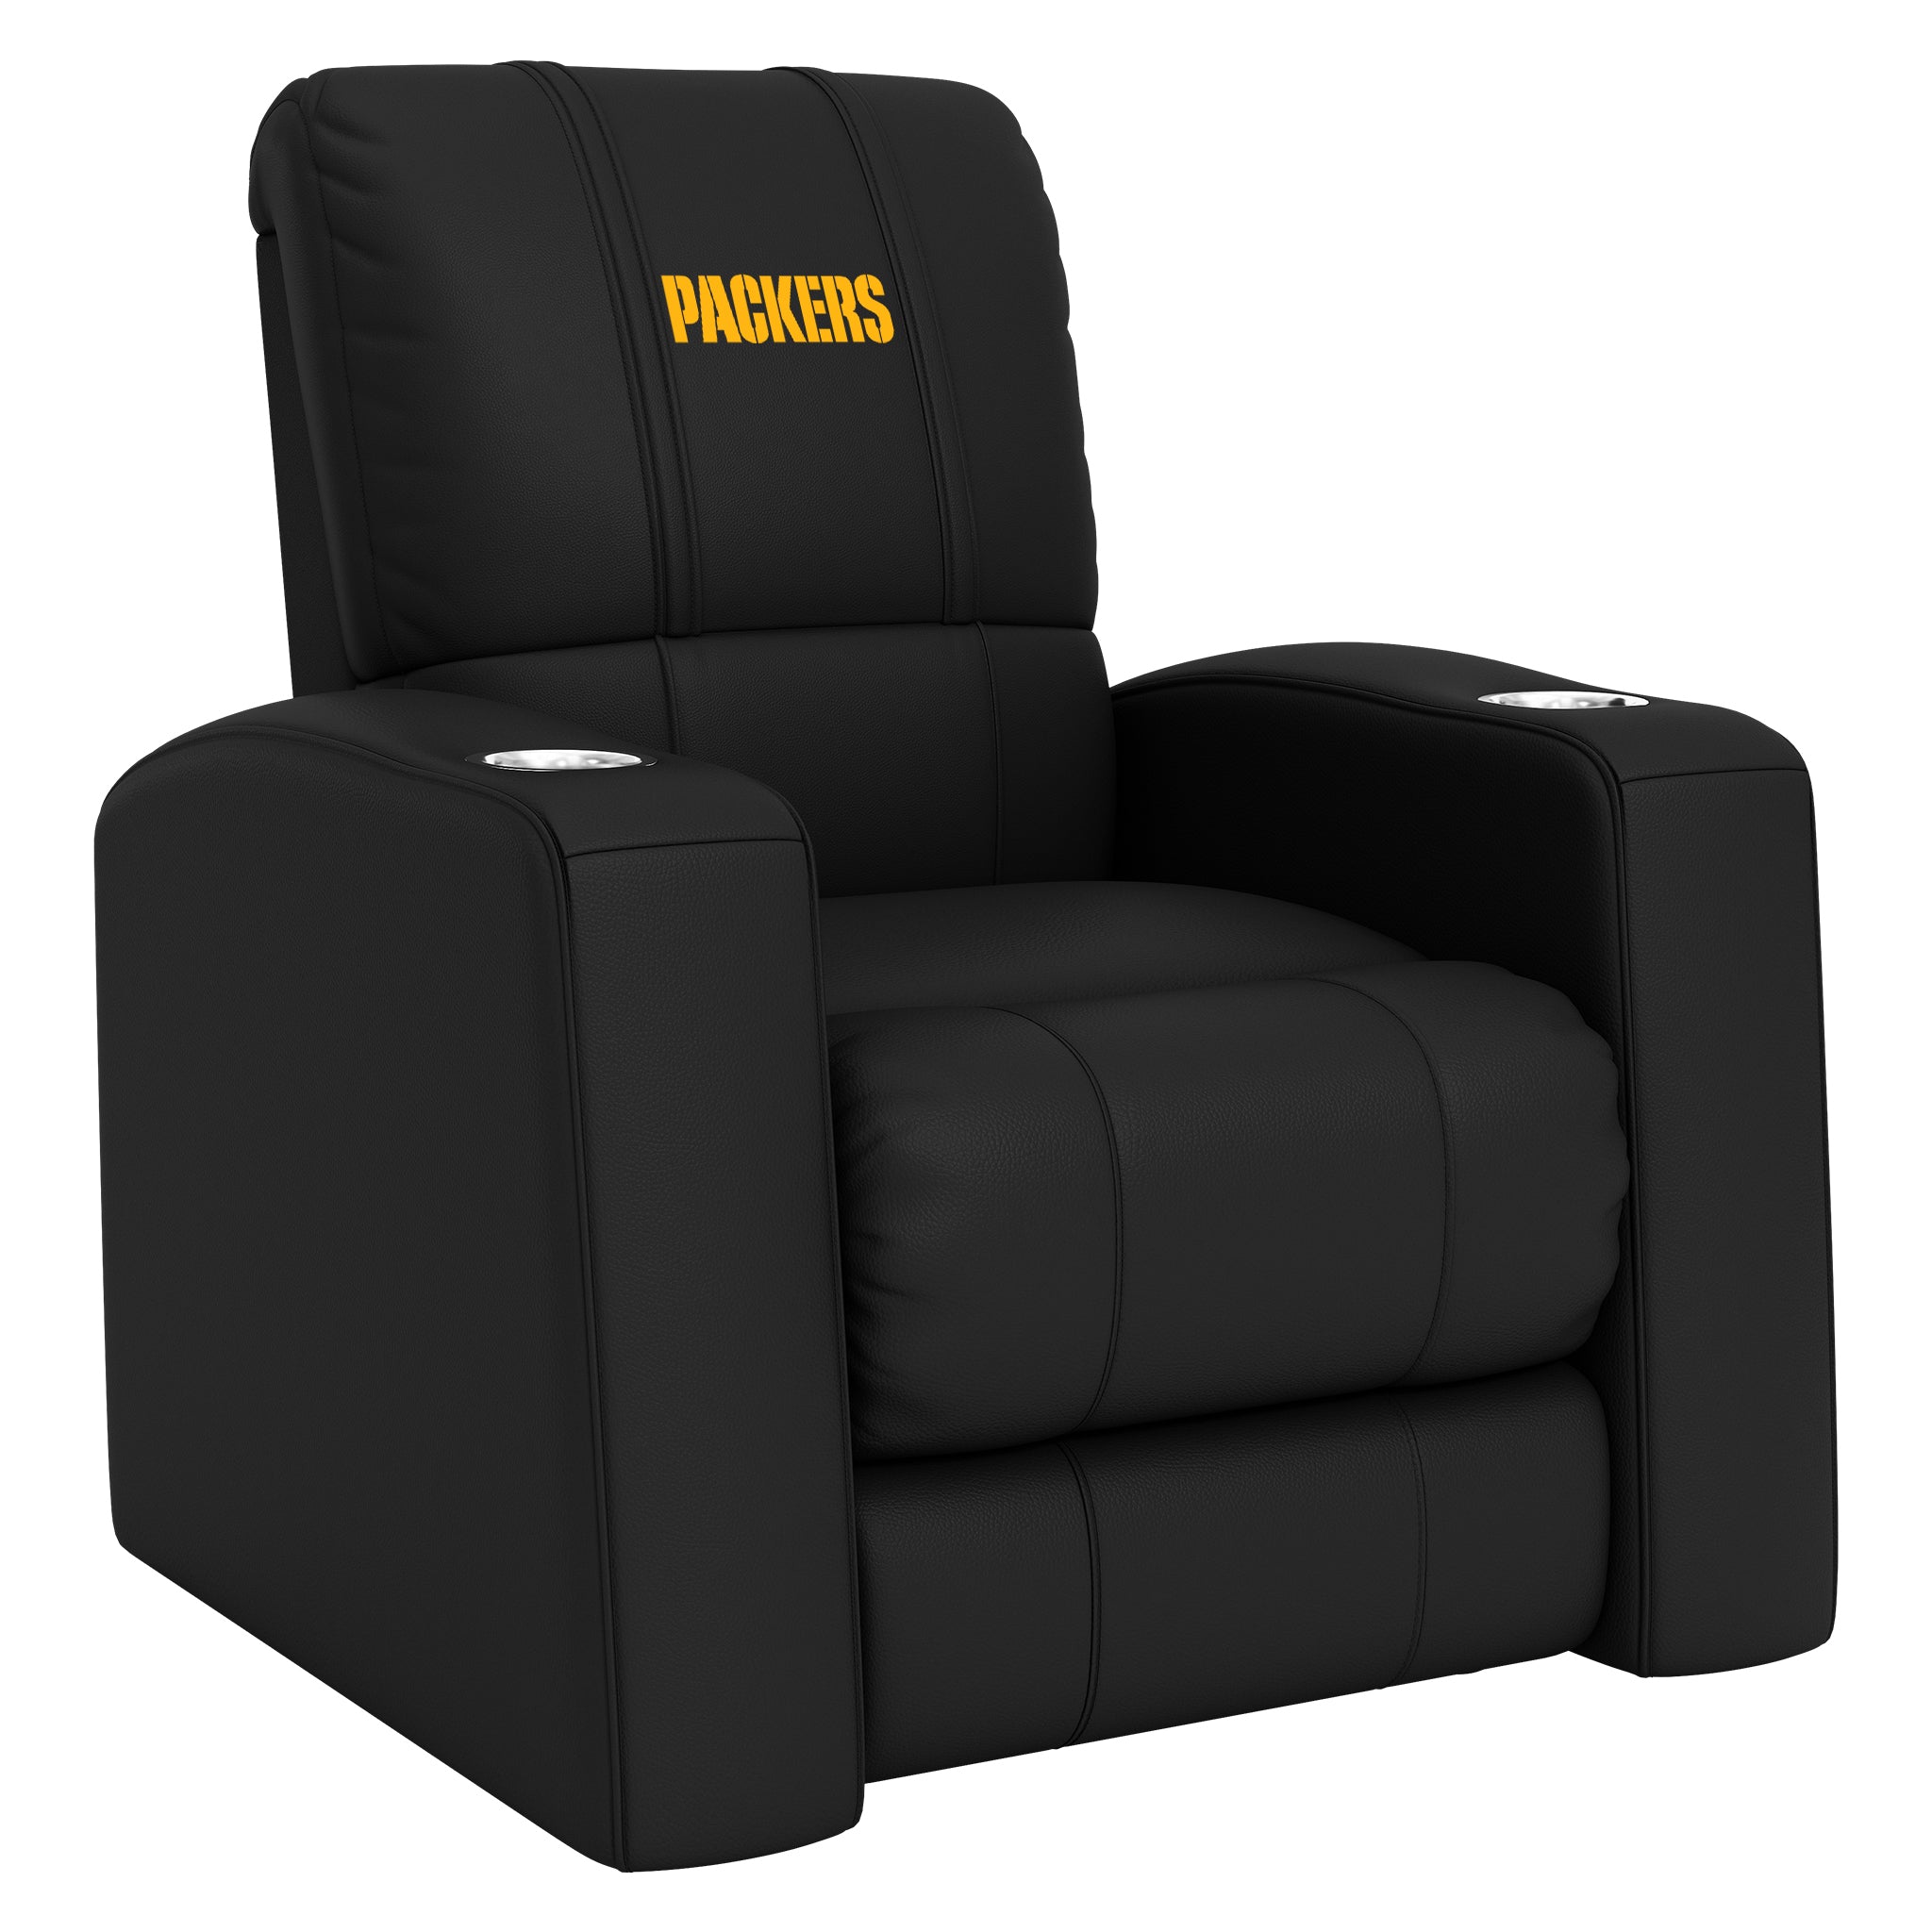 Green Bay Packers Home Theater Recliner